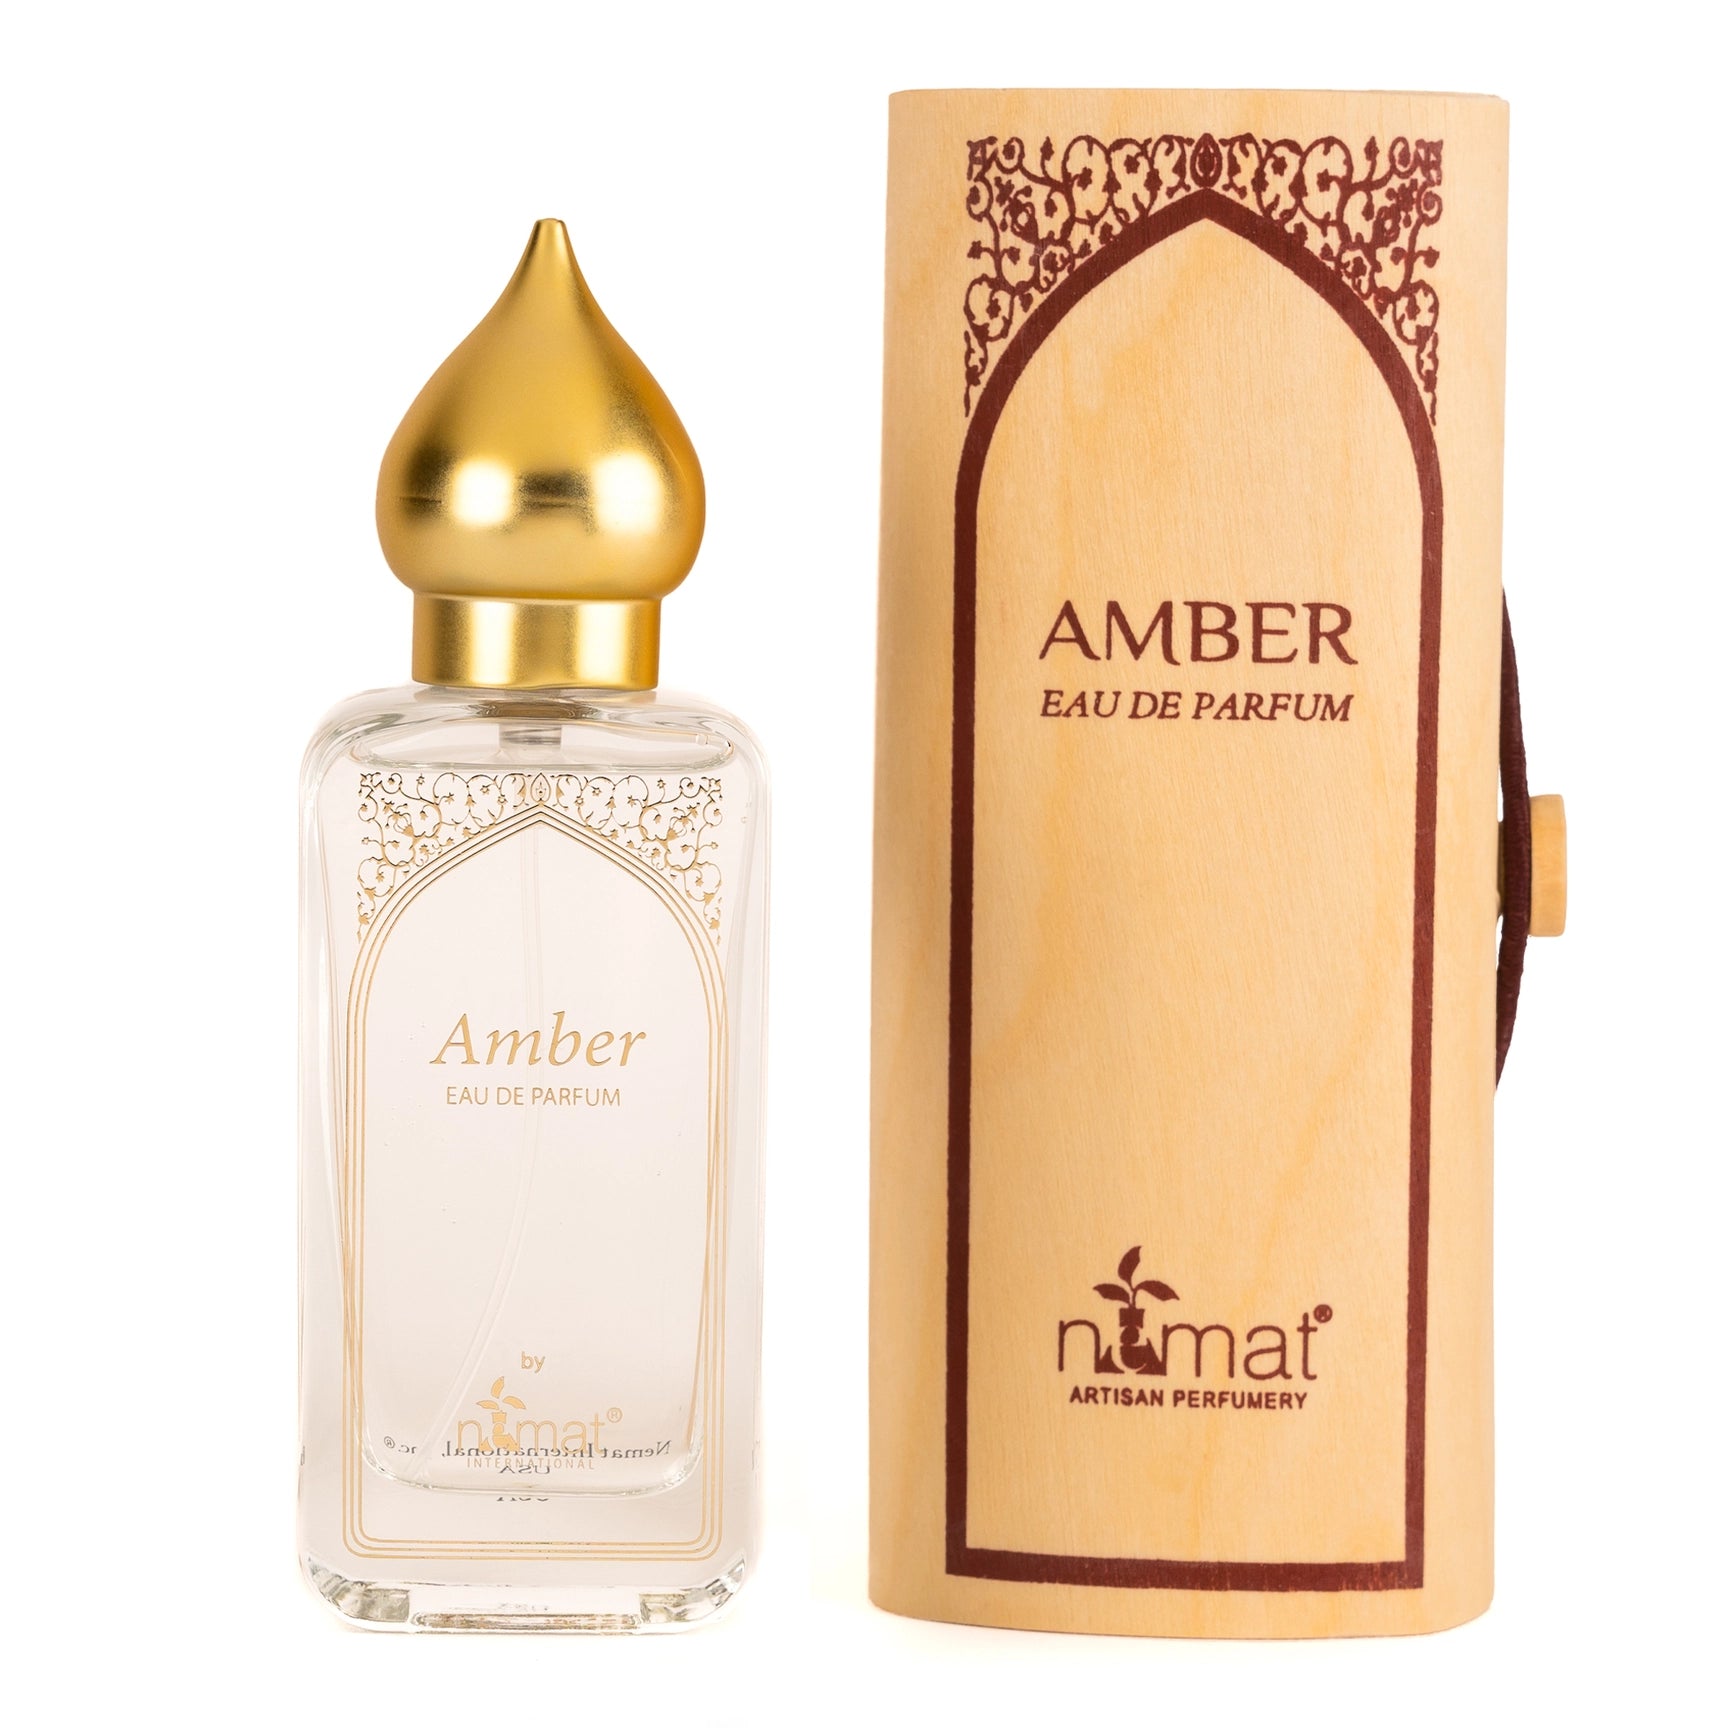 Collections - Nemat Perfumes